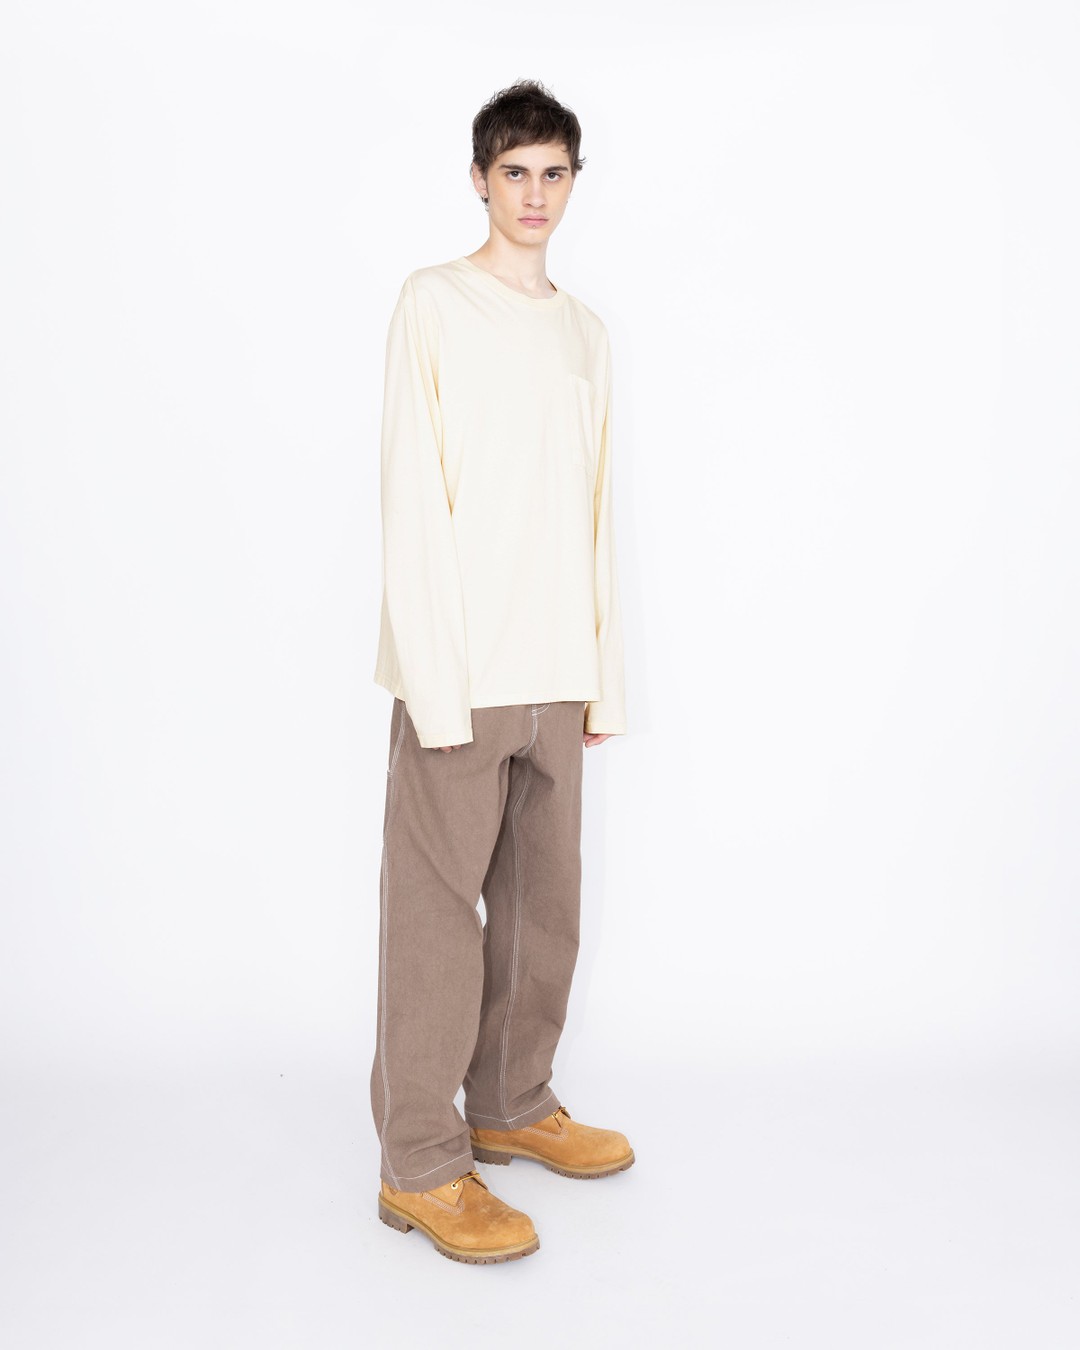 Highsnobiety HS05 – Pigment Dyed Boxy Long Sleeves Jersey Natural - Longsleeves - Beige - Image 4